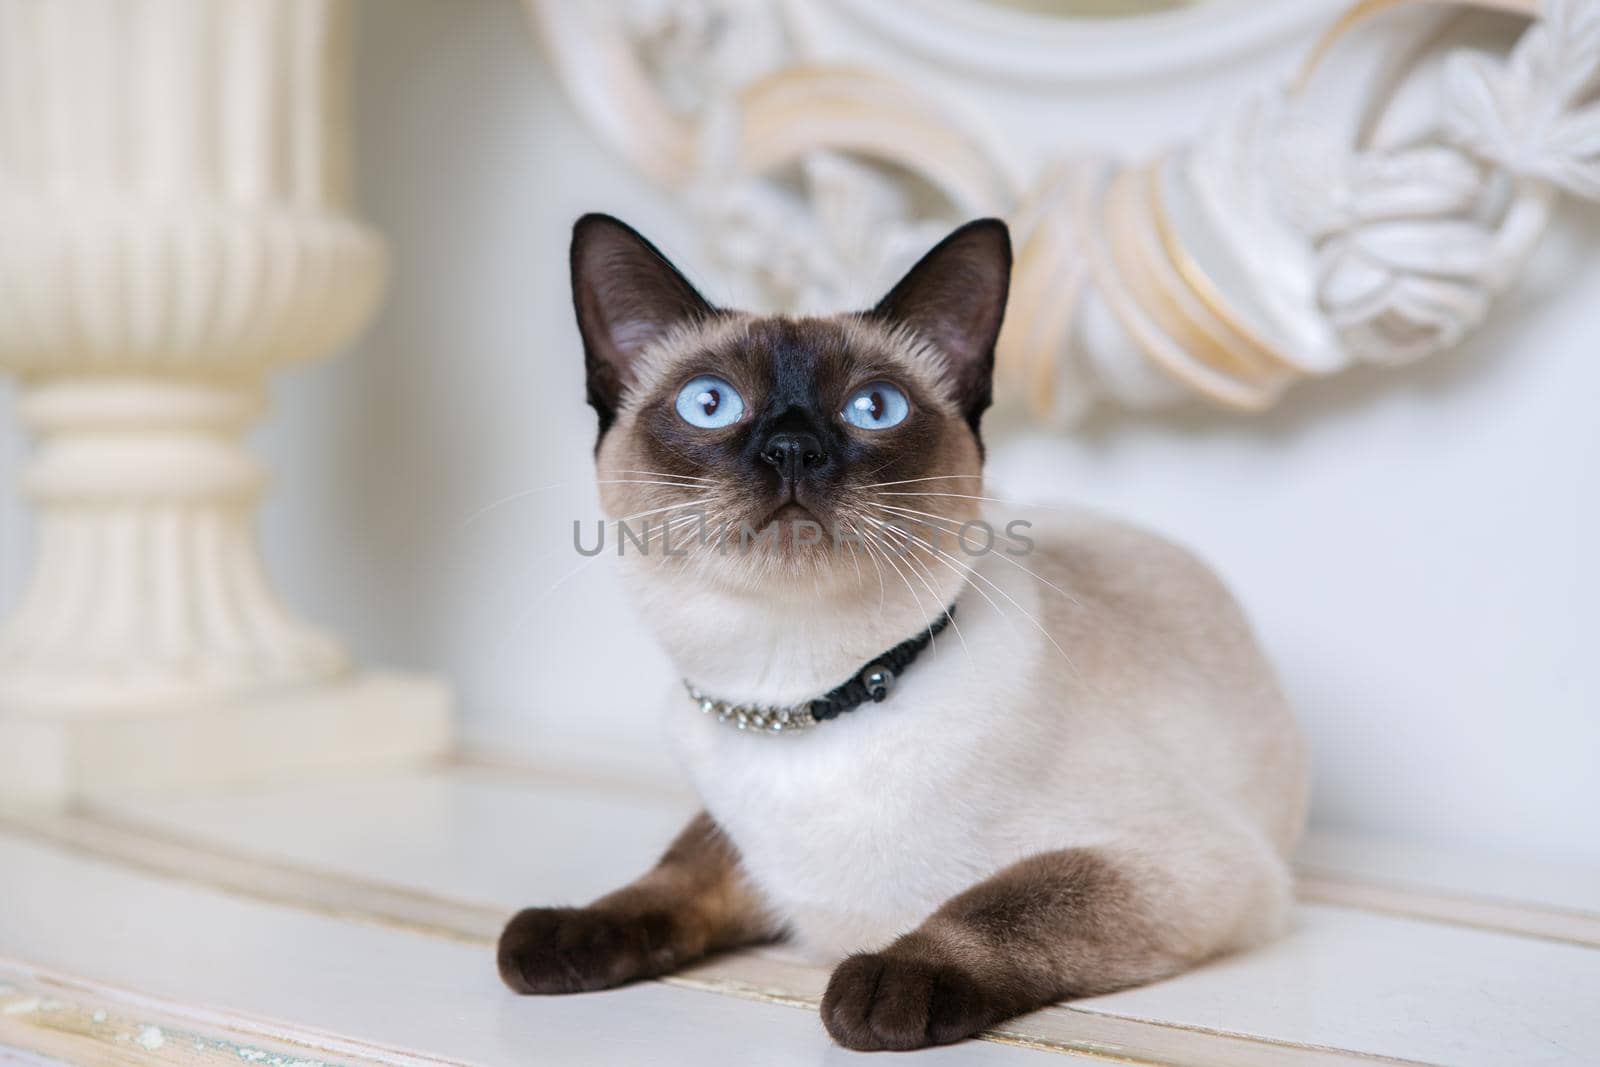 two color cat without tail Mekong Bobtail breed with jewel precious necklace of pearls around neck. Cat And necklace. Blue eyed Female Cat of Breed Mekong Bobtail, Sitting with gems on the neck by Tomashevska